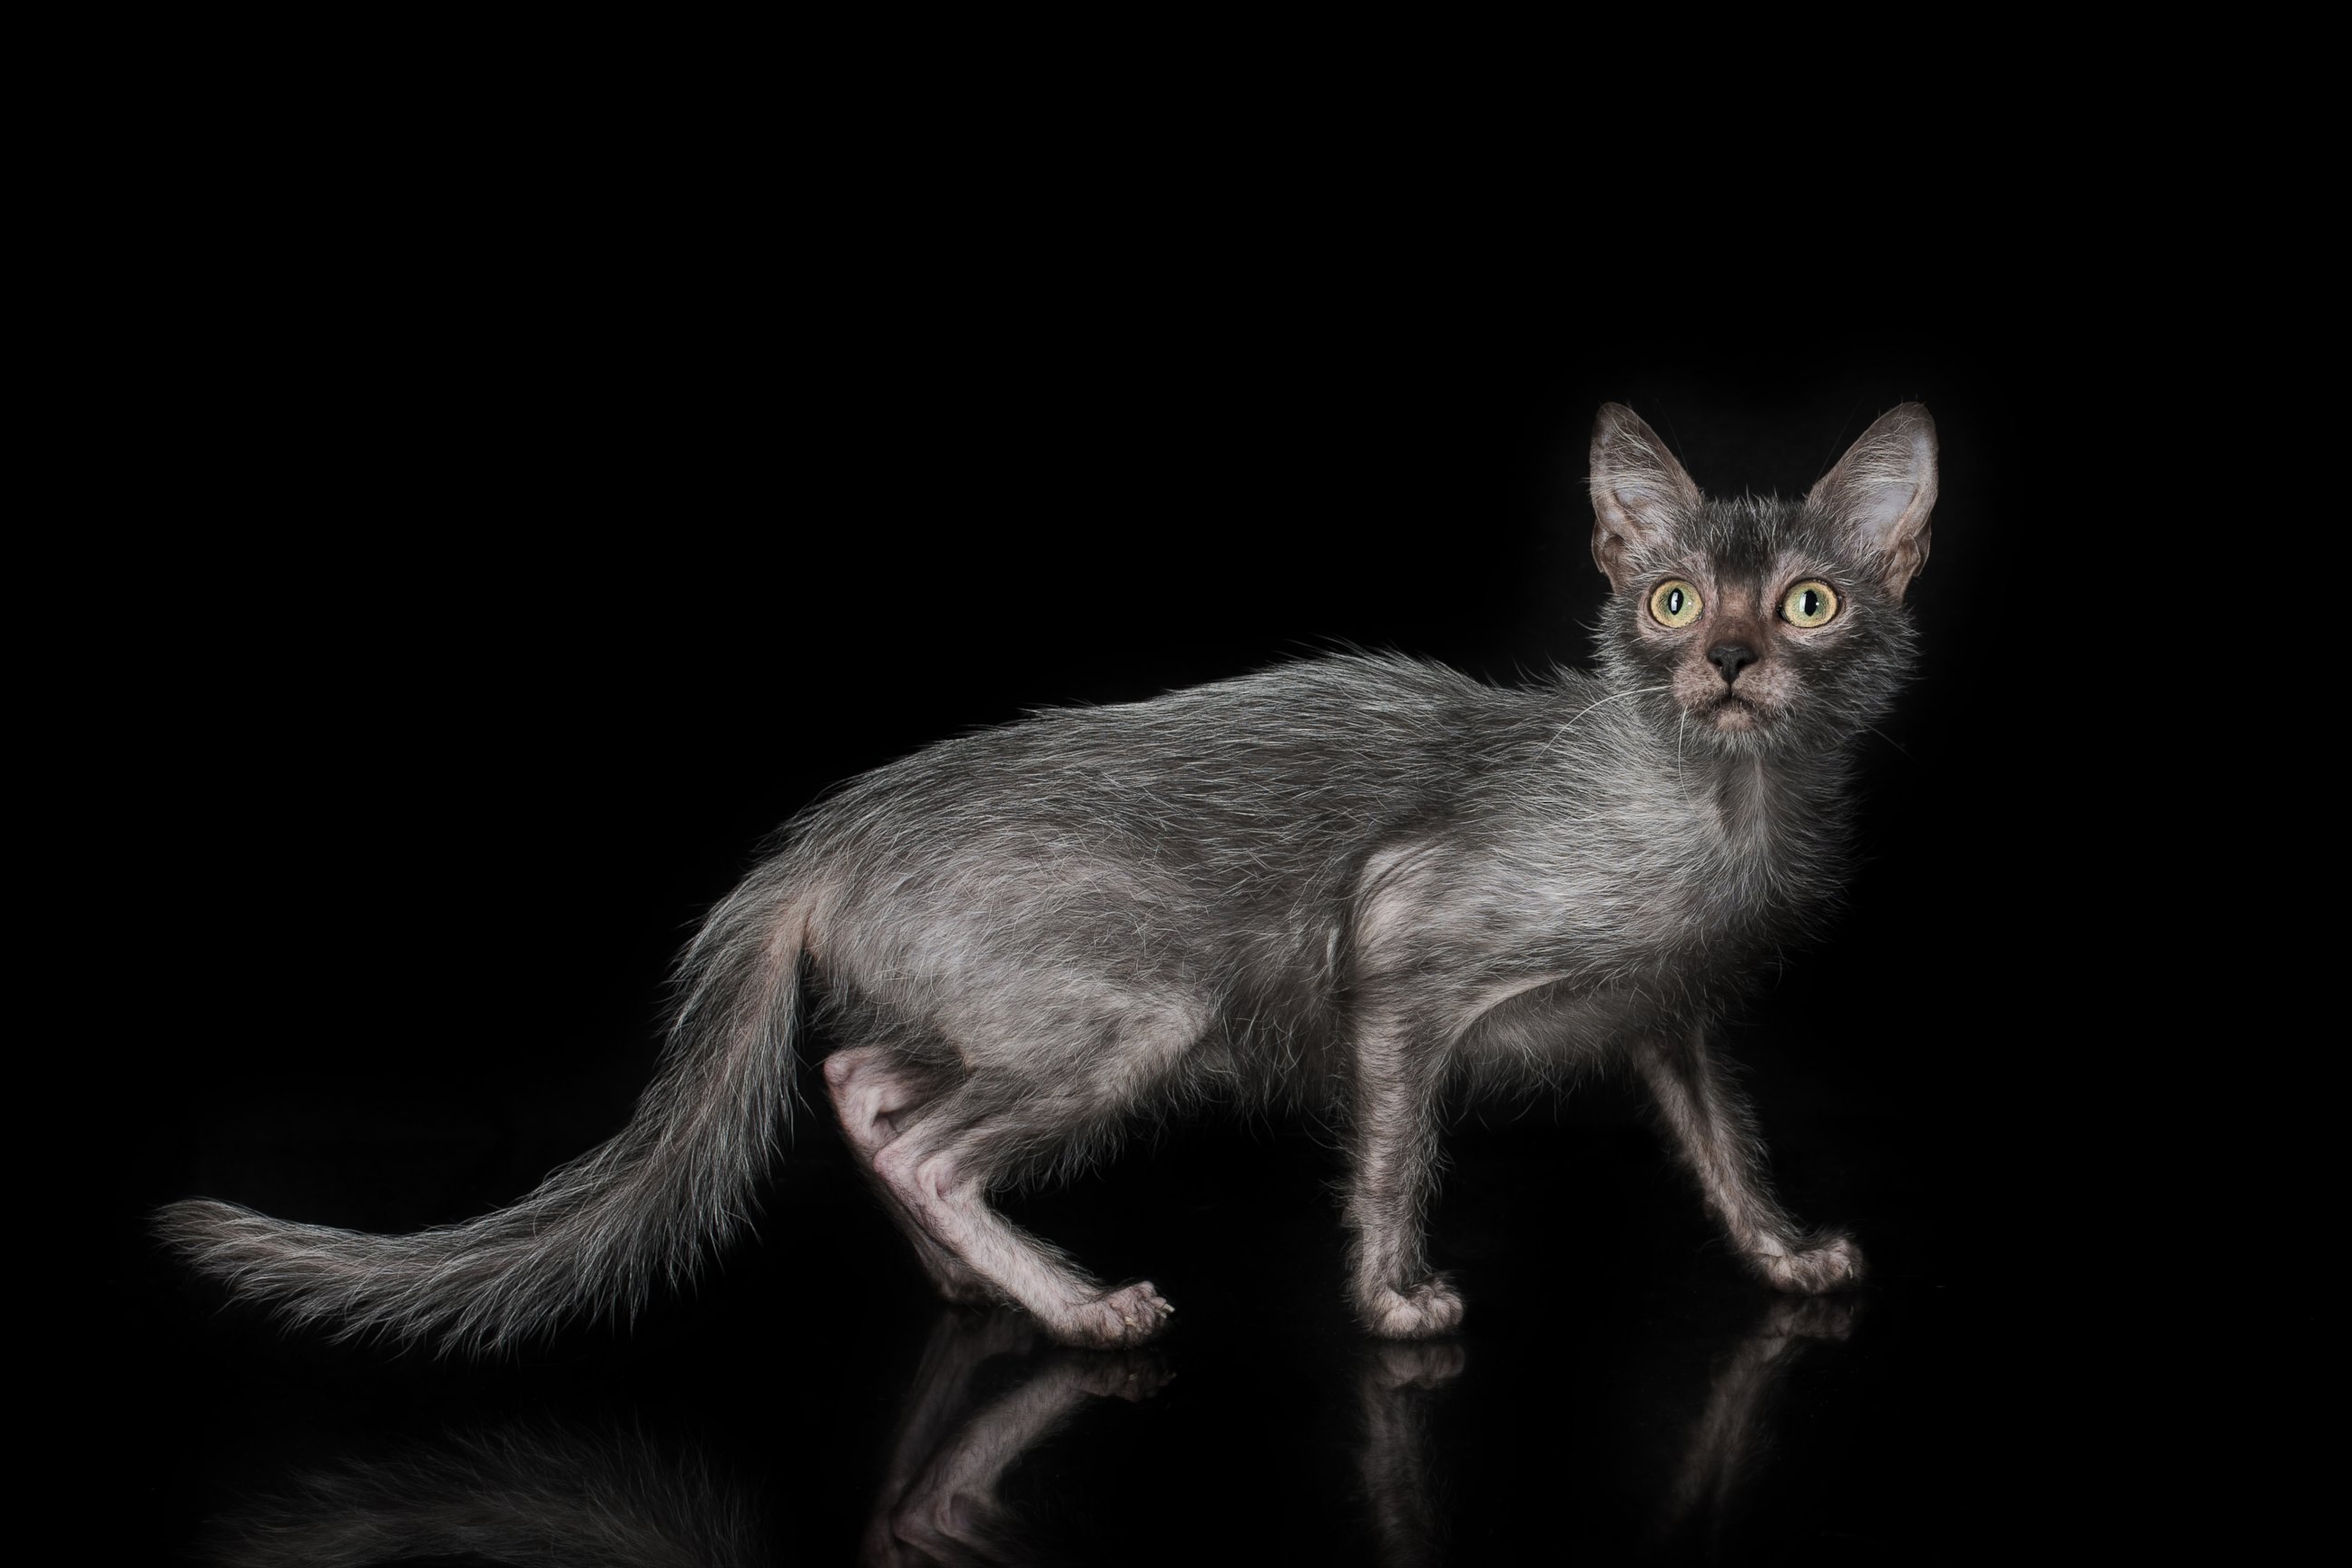 PHOTO: The Lykoi has earned the nickname "Werewolf Cat" because they look like werewolves and have dog-like personalities.